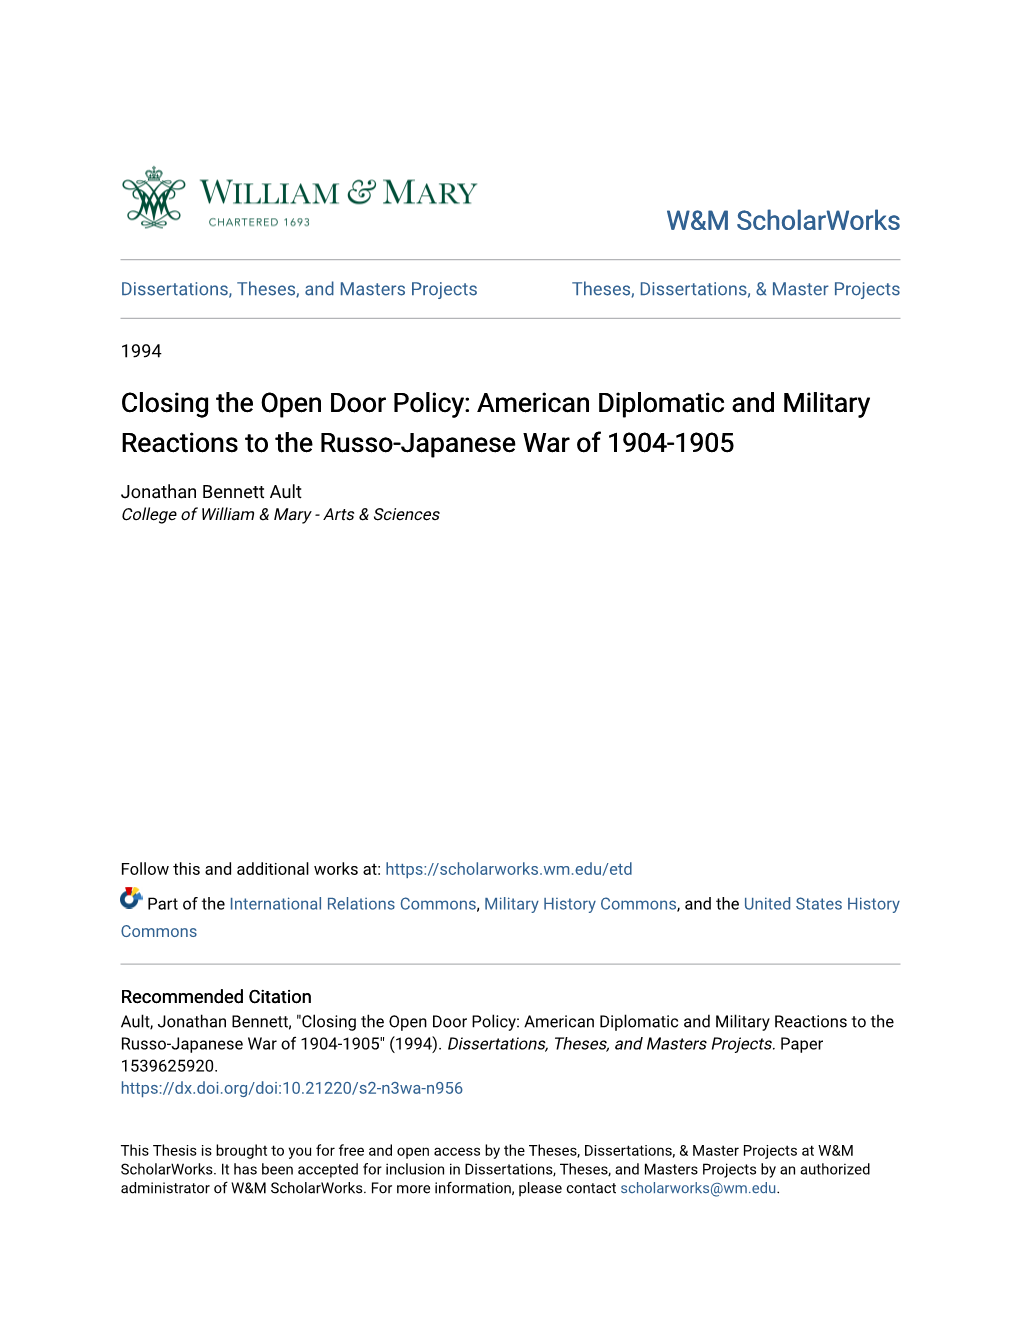 Closing the Open Door Policy: American Diplomatic and Military Reactions to the Russo-Japanese War of 1904-1905